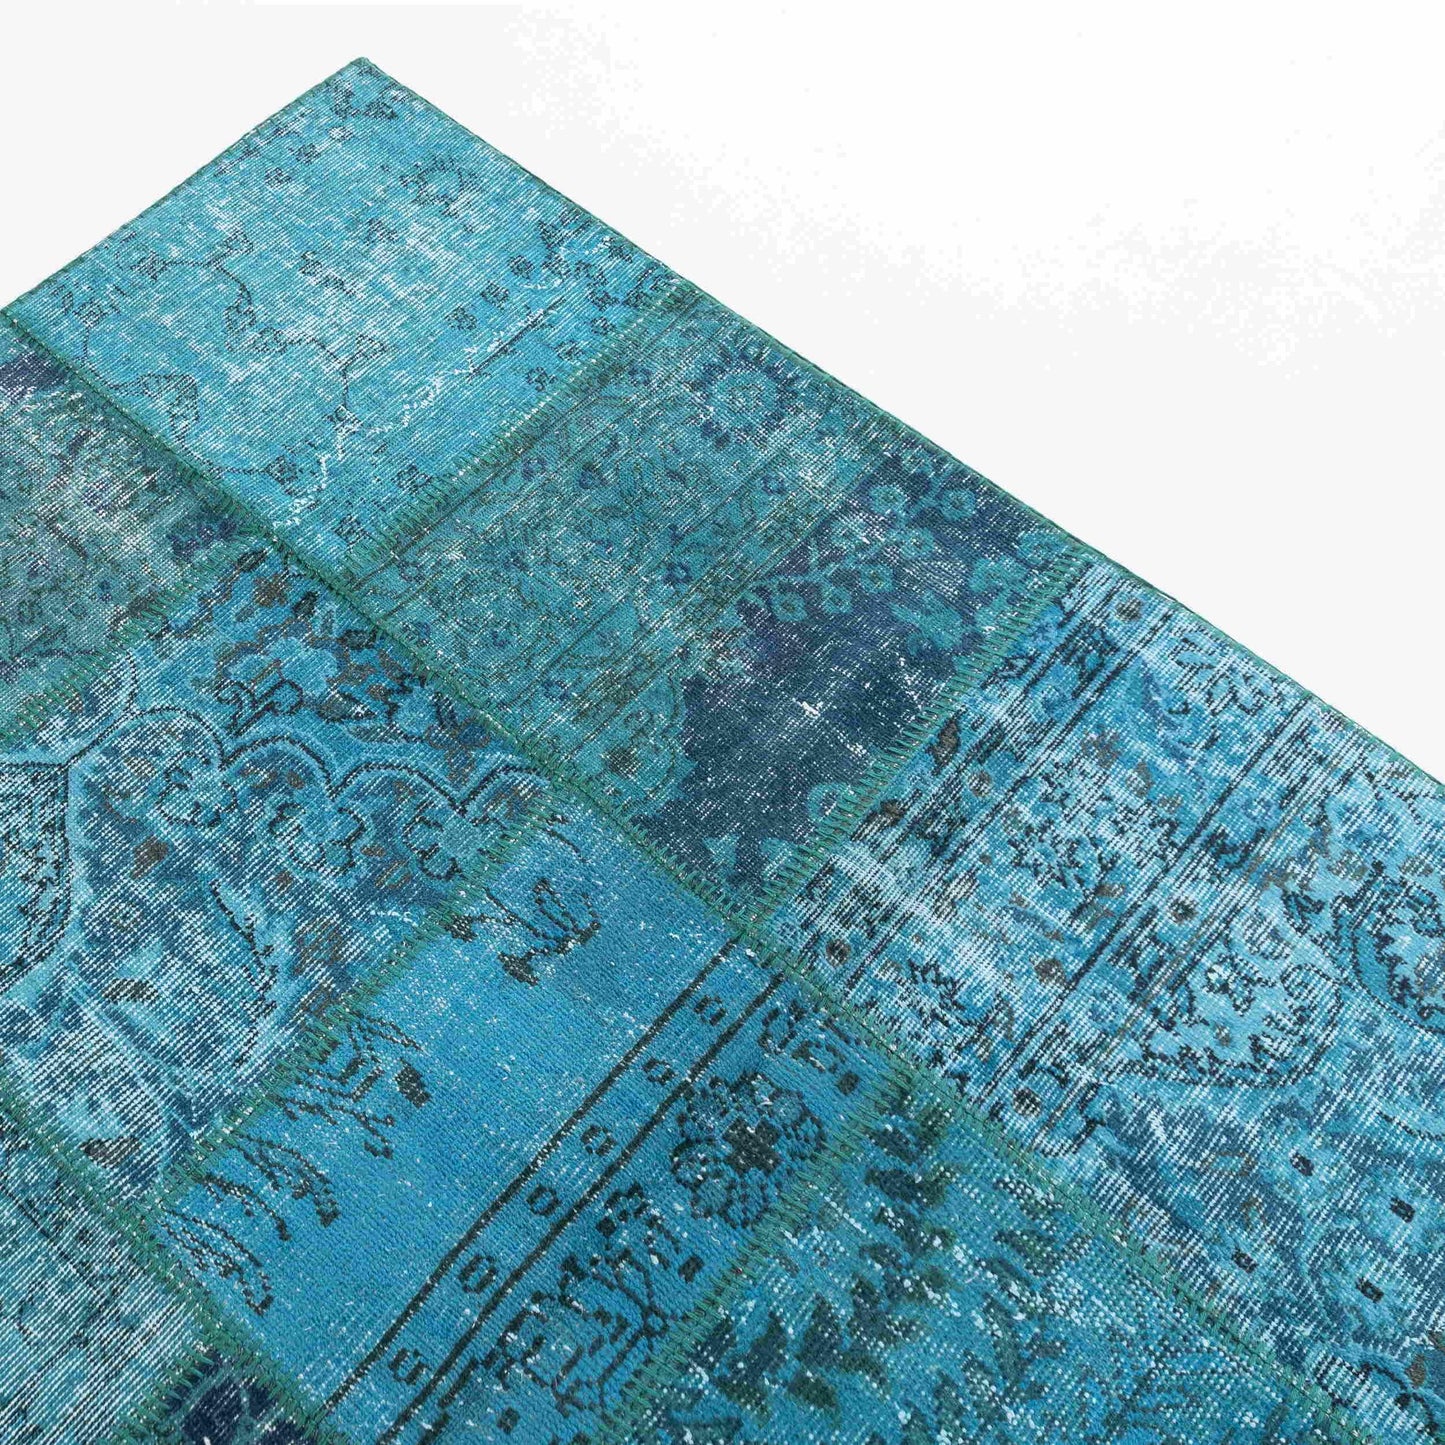 Oriental Rug Patchwork Hand Knotted Wool On Wool 200 x 200 Cm - 6' 7'' x 6' 7'' ER12